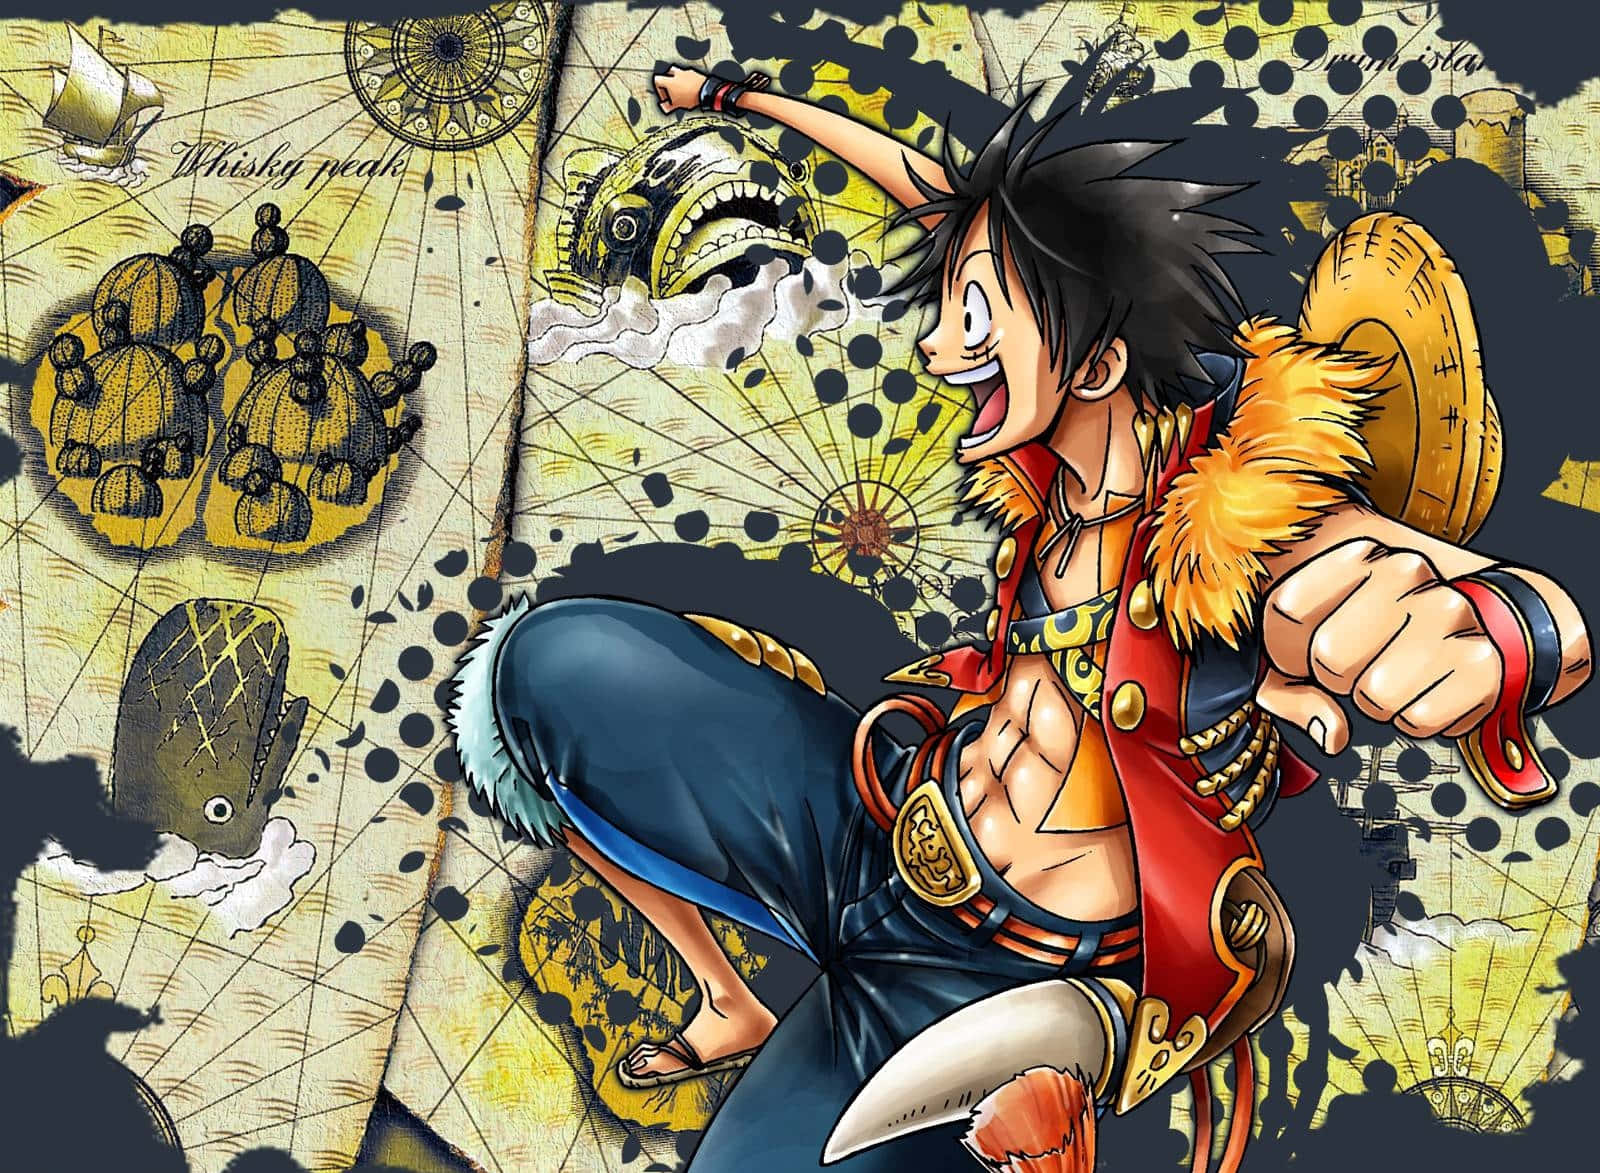 Wallpaper Tunnel - Luffy Wallpapers Download: https://www.wptunnel.com/luffy -wallpapers-6/ View Luffy Wallpapers with the stickers Eiichiro Oda,  Fictional Character, Luffy, Manga Series, One Piece in the wallpaper  tunnel. | Facebook